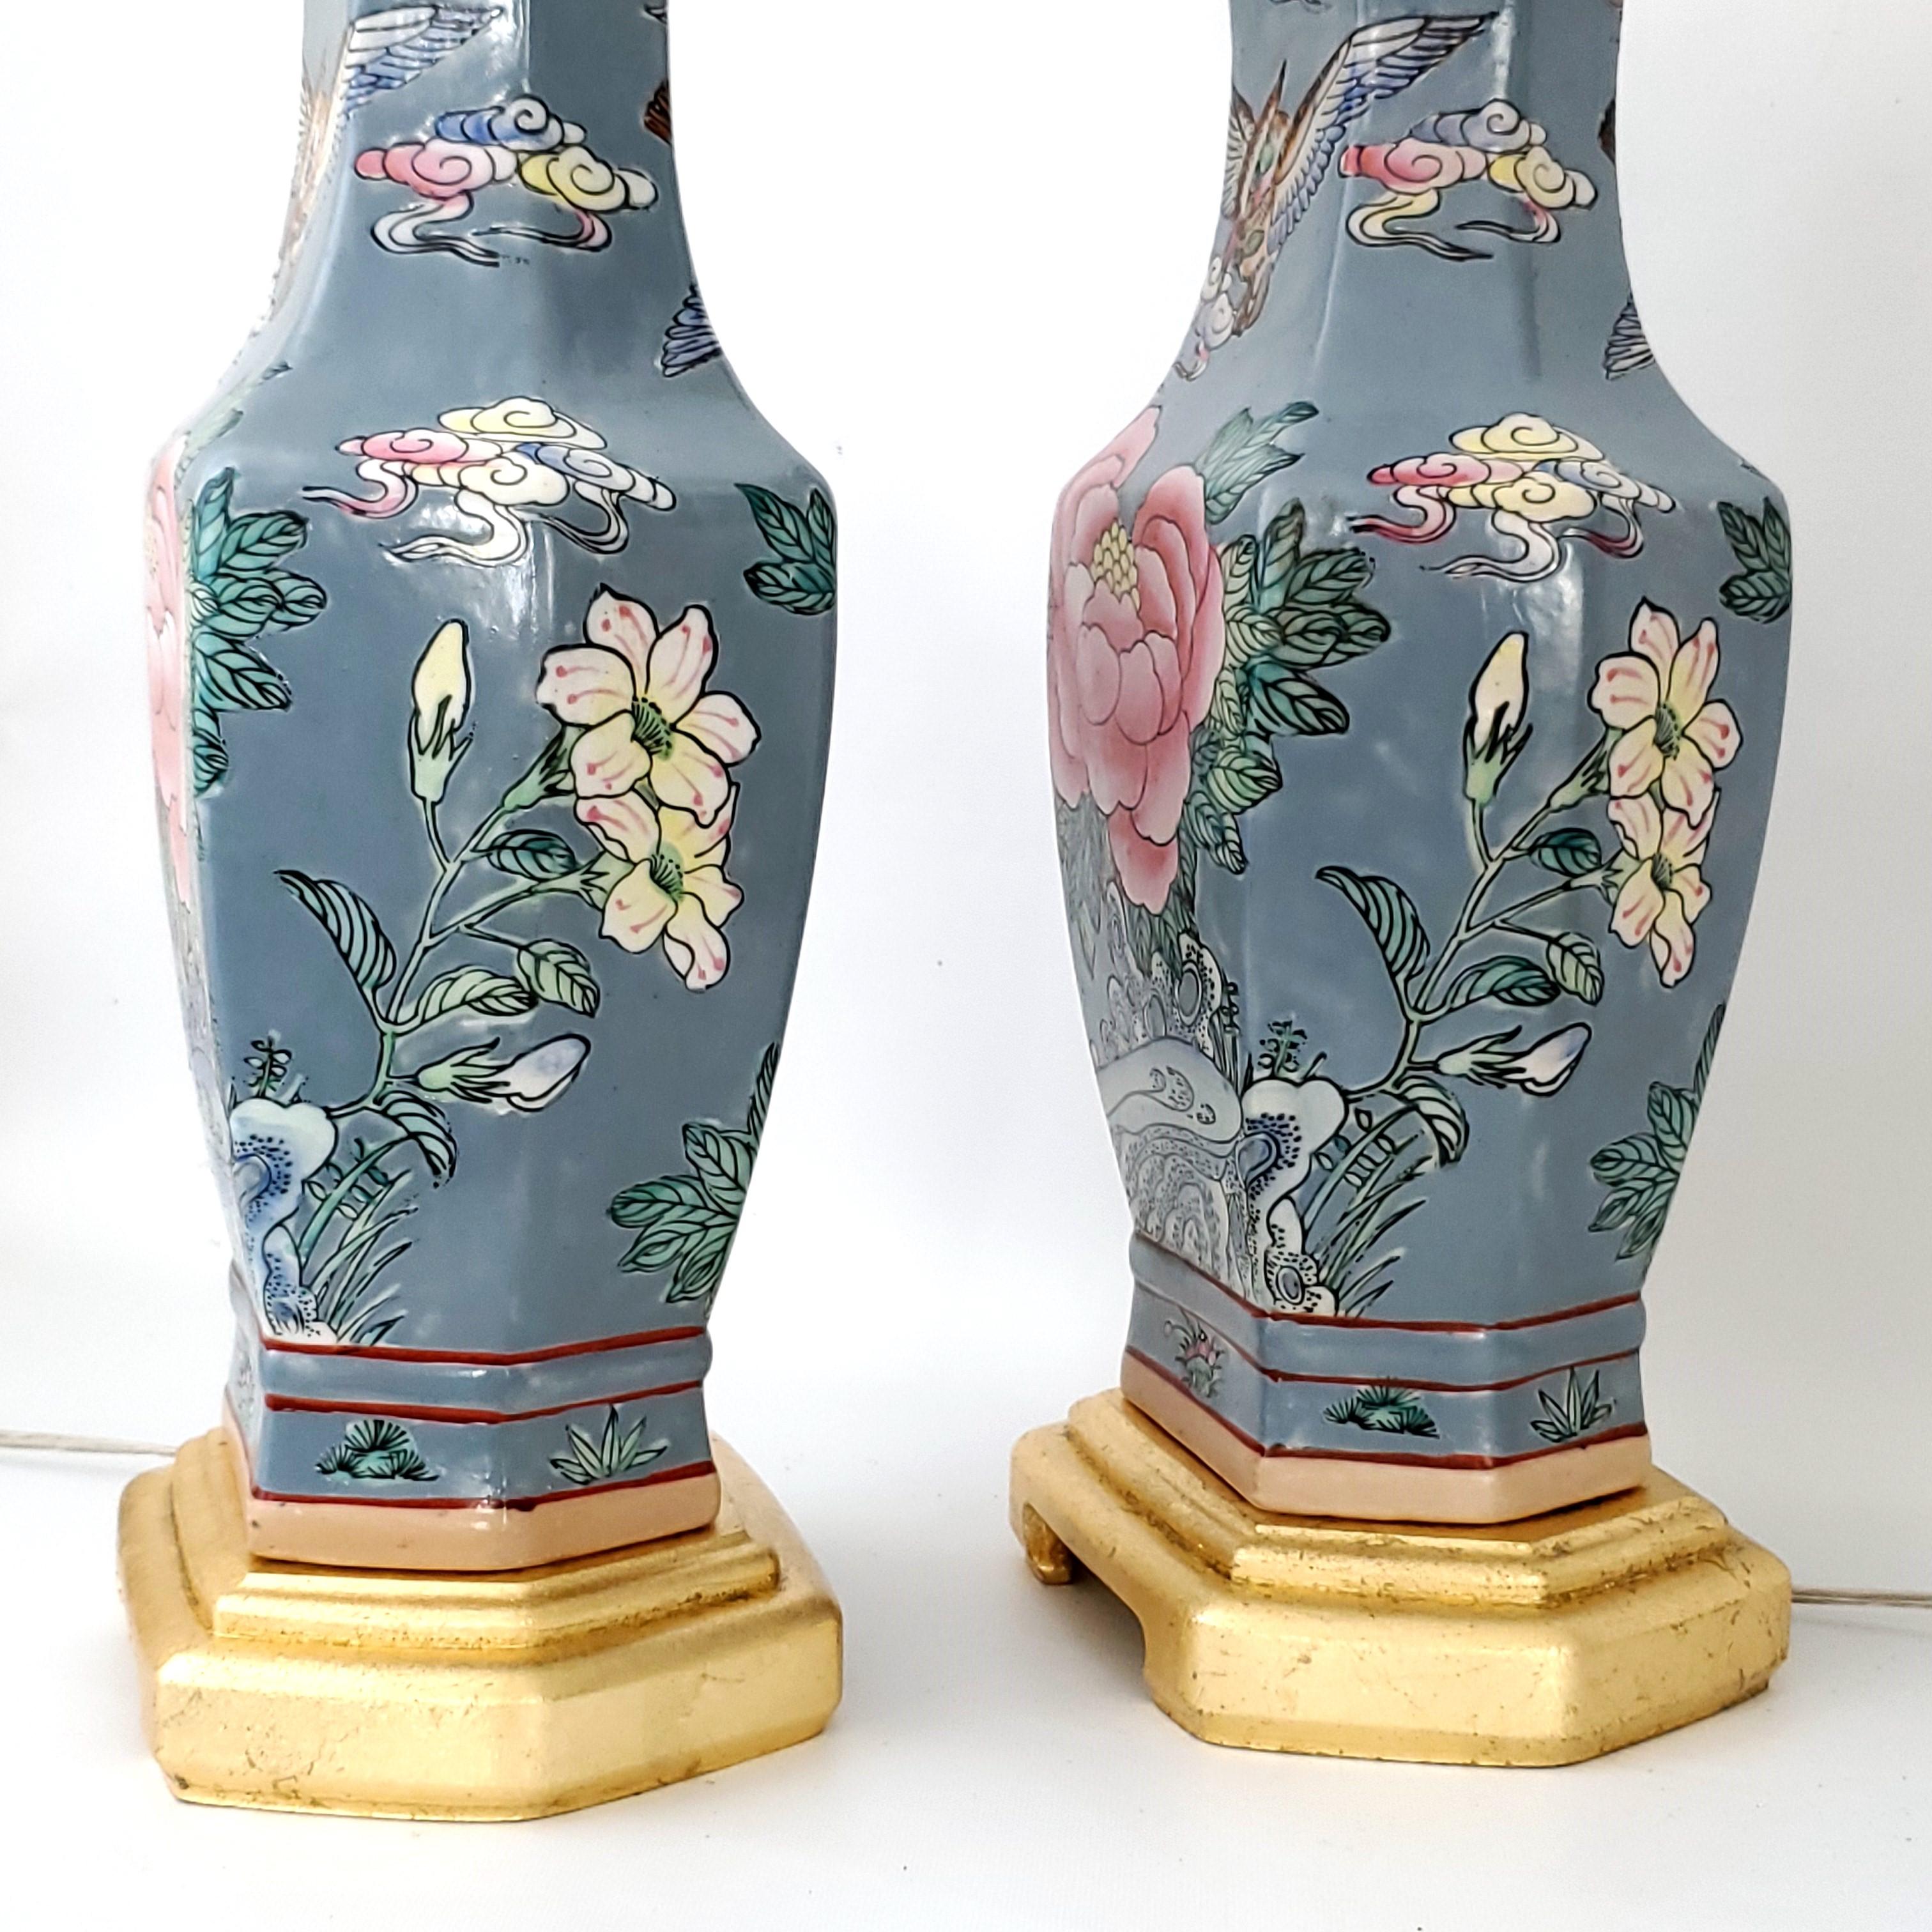 Pair of Vintage Chinese Porcelain Ceramic Table Lamps with Pink Lamp Shades For Sale 6